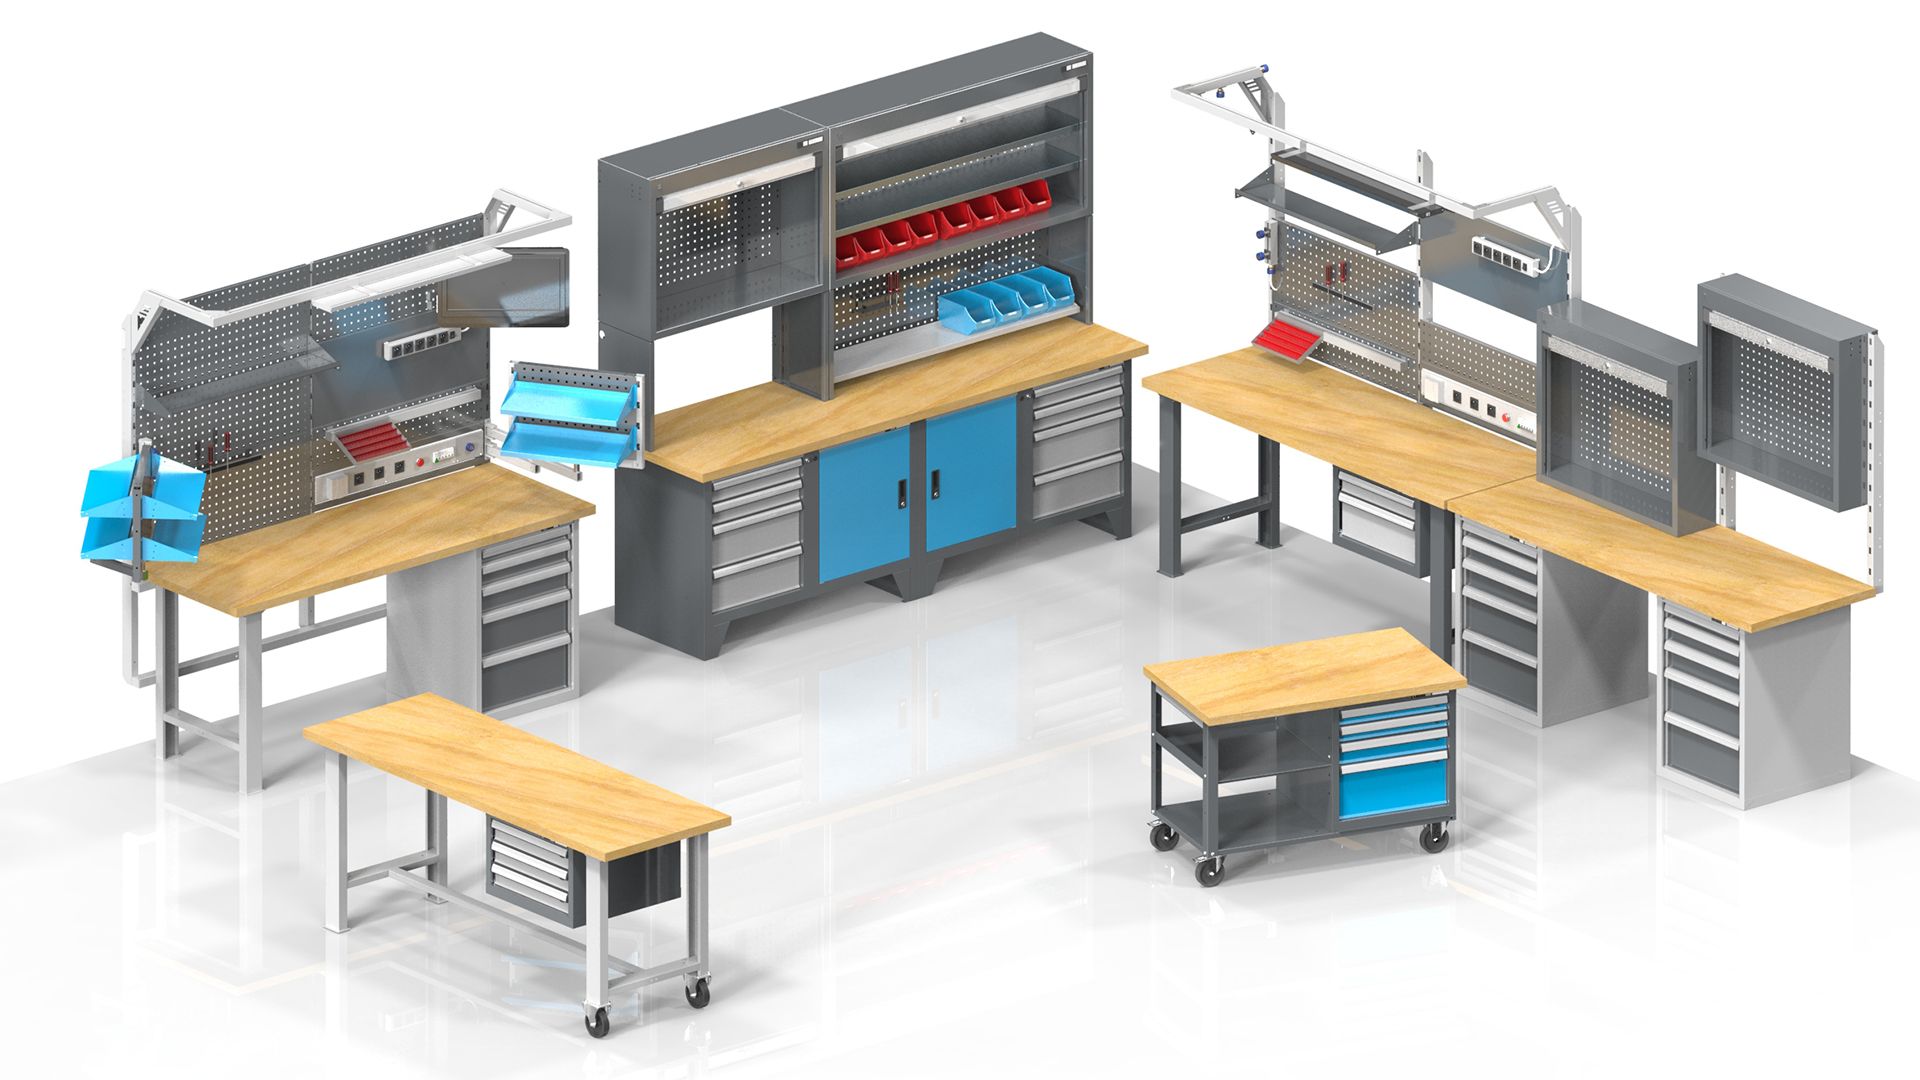 Can today's bench survive the next generation? Workshop furniture and Industry 4.0